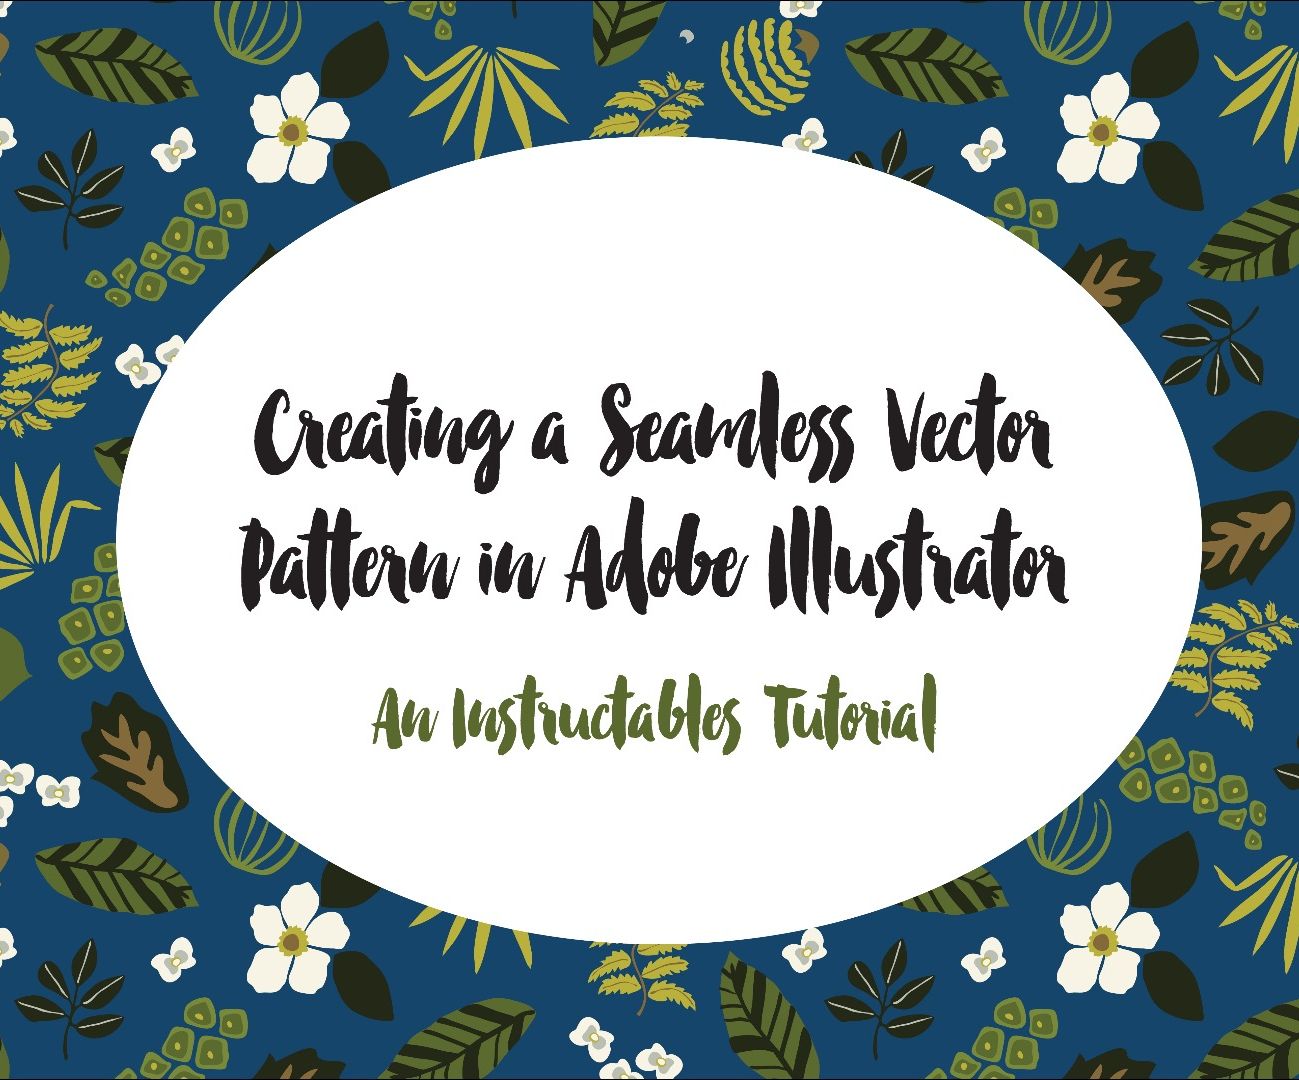 Creating a Seamless Vector Pattern in Adobe Illustrator